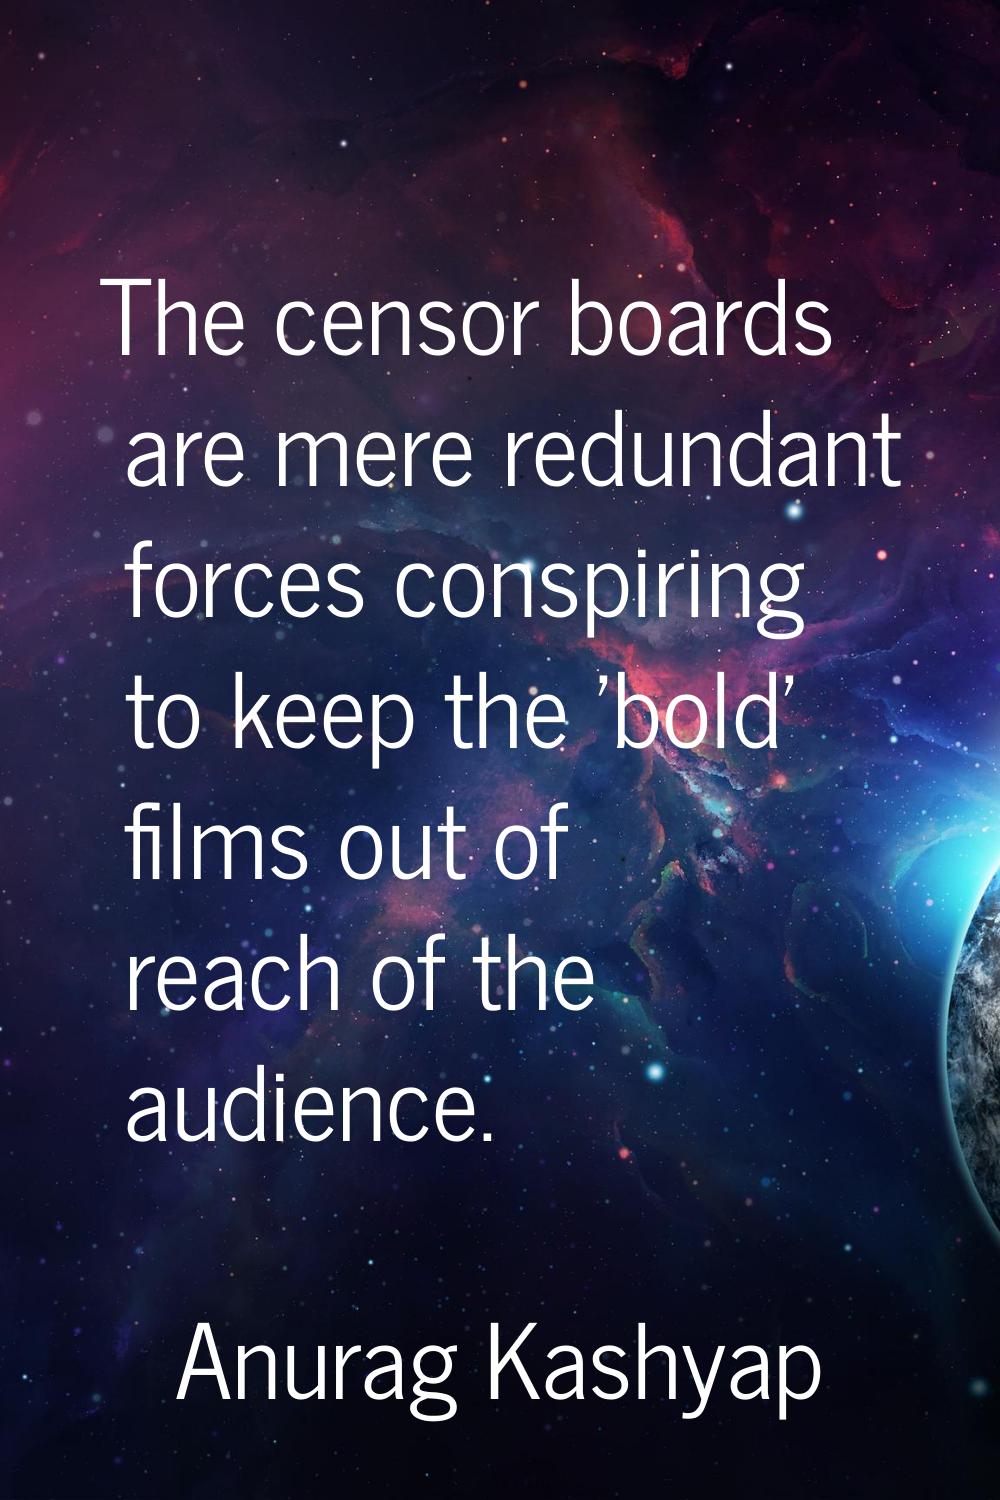 The censor boards are mere redundant forces conspiring to keep the 'bold' films out of reach of the